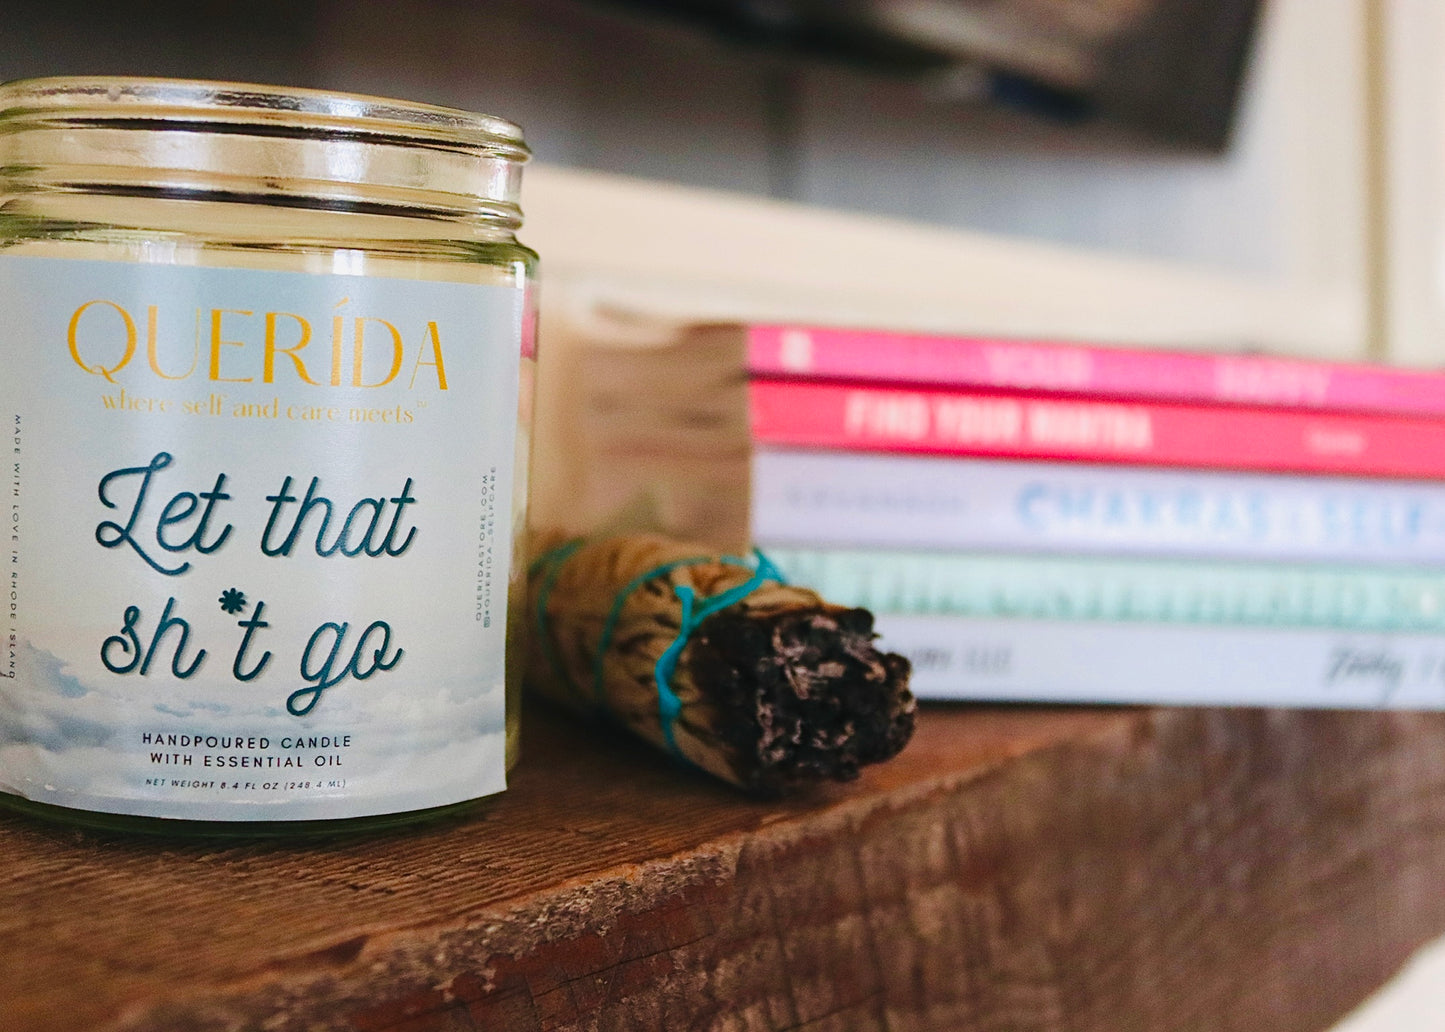 'Let That Sh*t Go' Candle